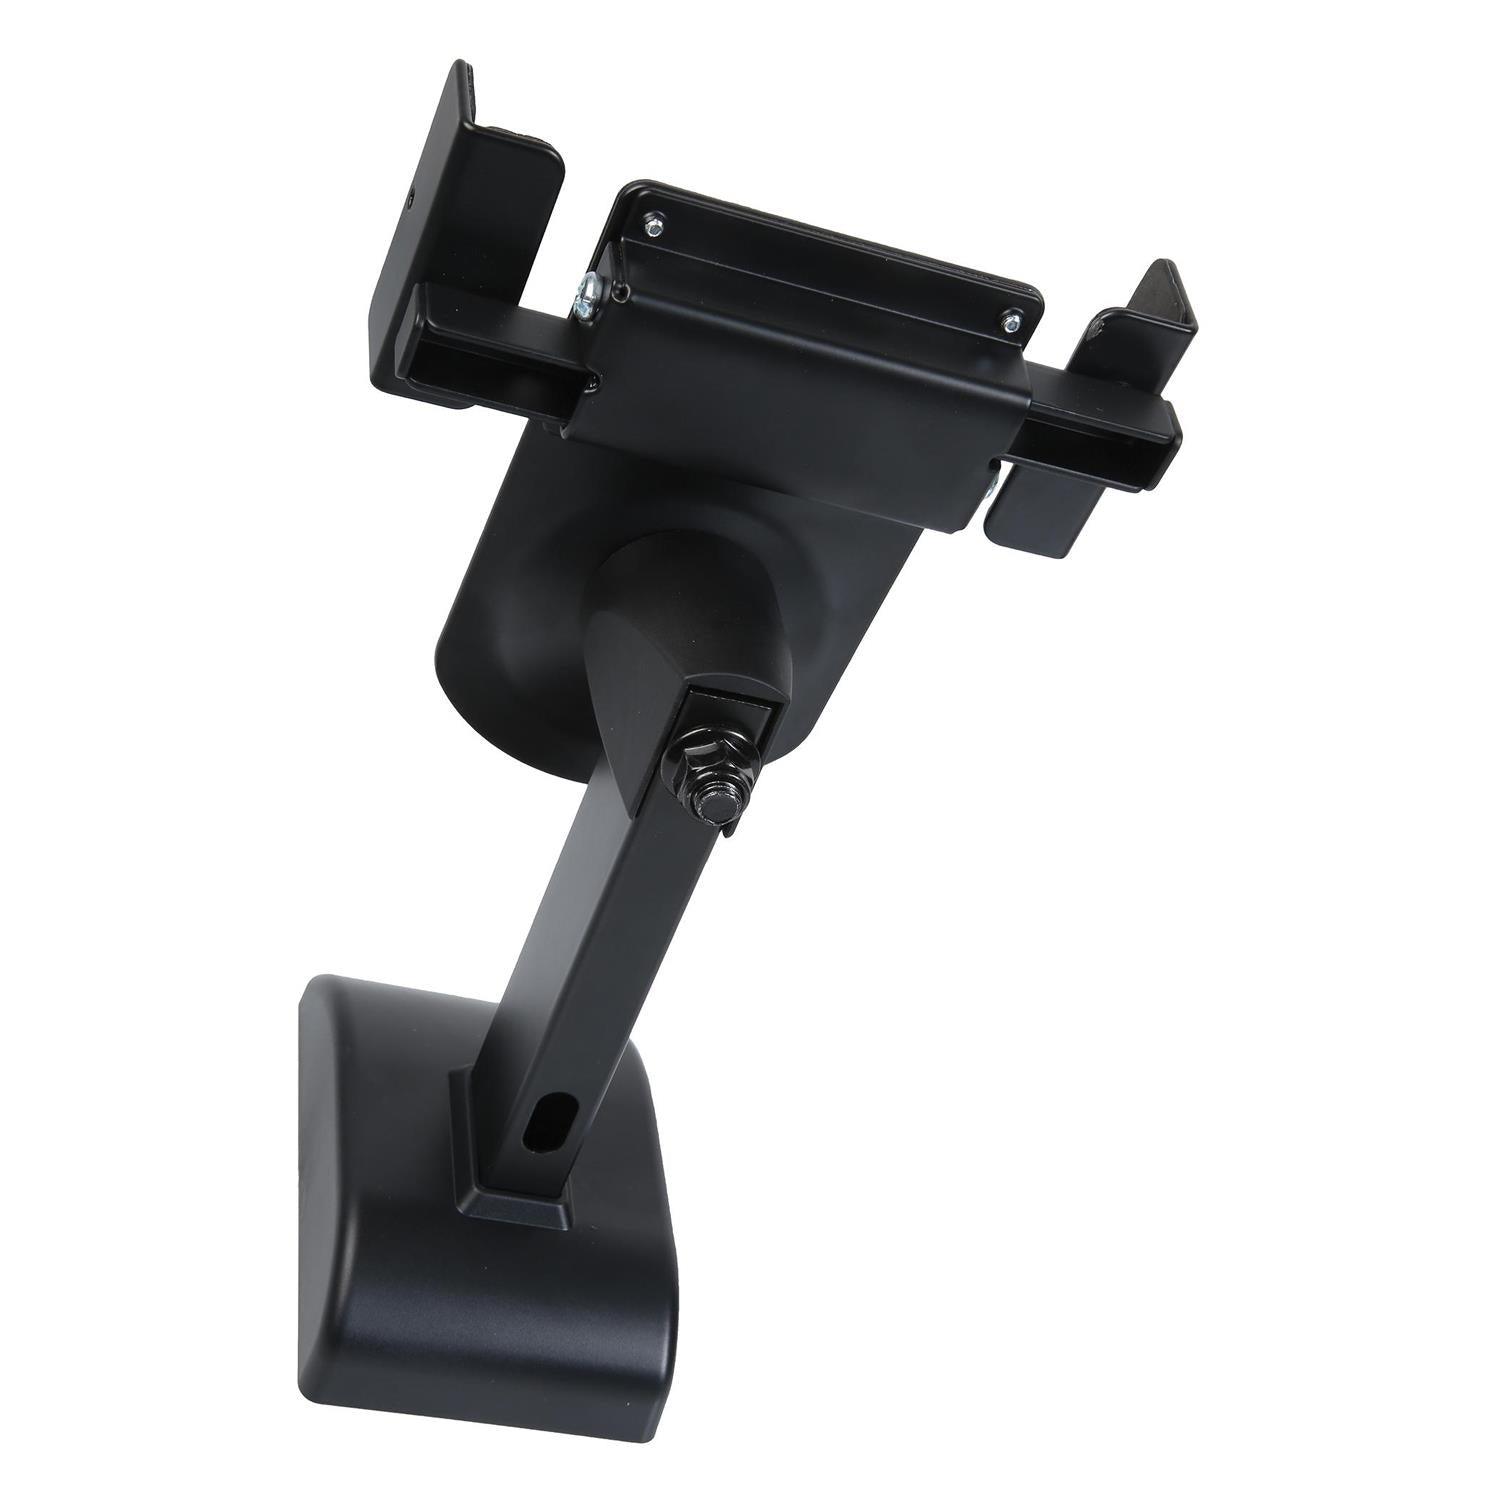 2 x Pulse Side Clamping Wall Mount Speaker Stands with Tilt & Swivel - DY Pro Audio